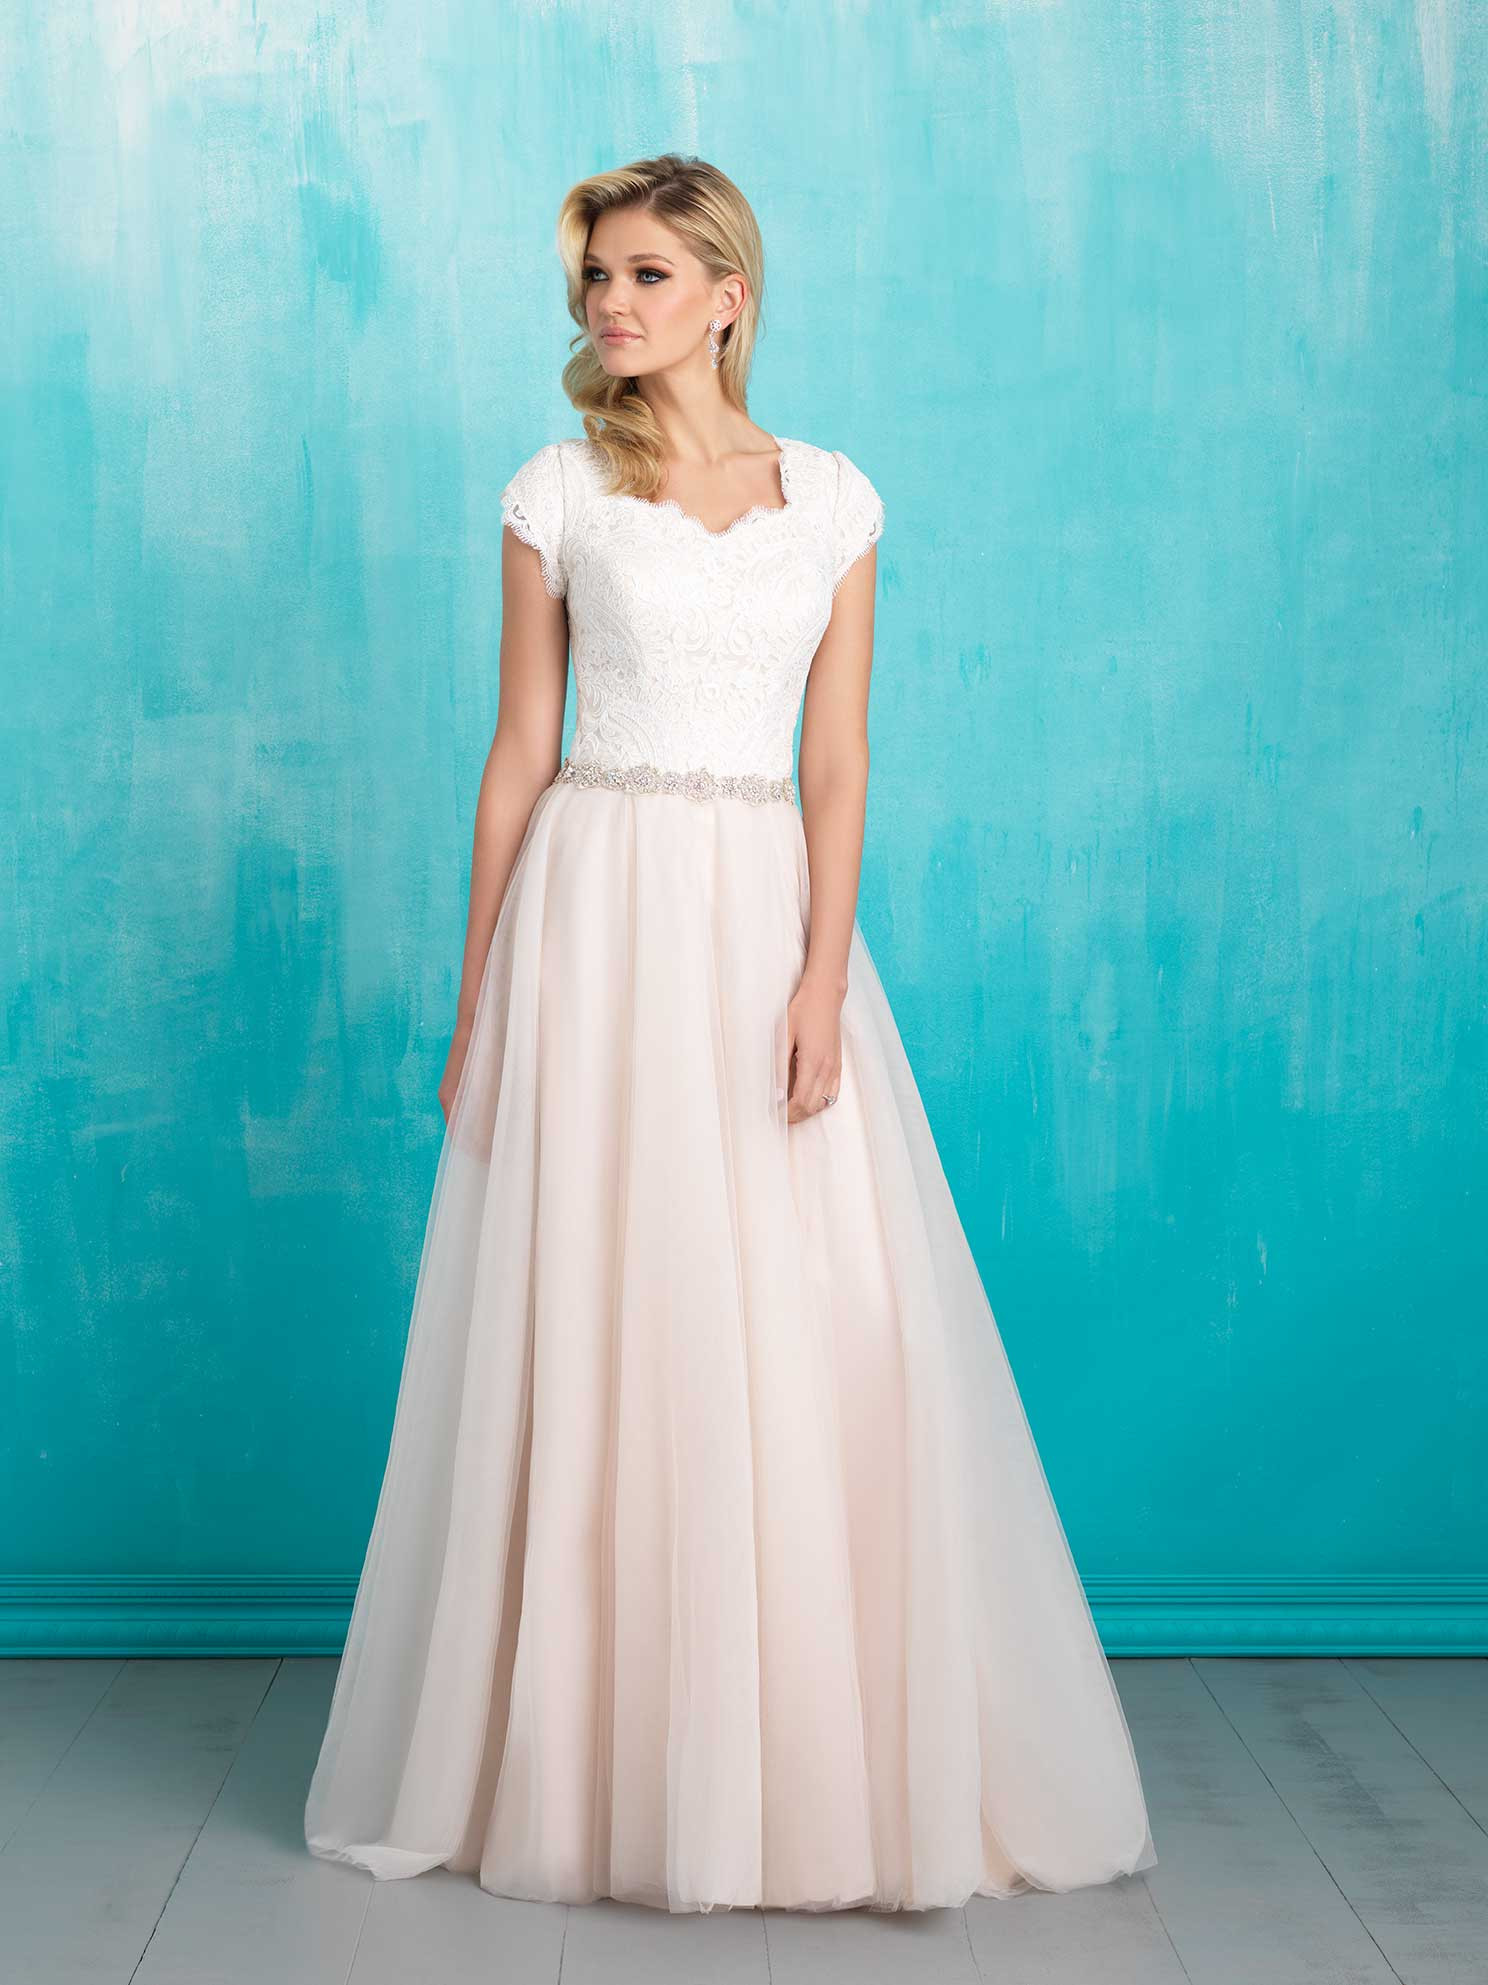 Modest Wedding Gowns
 Where to Buy a Modest Wedding Dress Racked